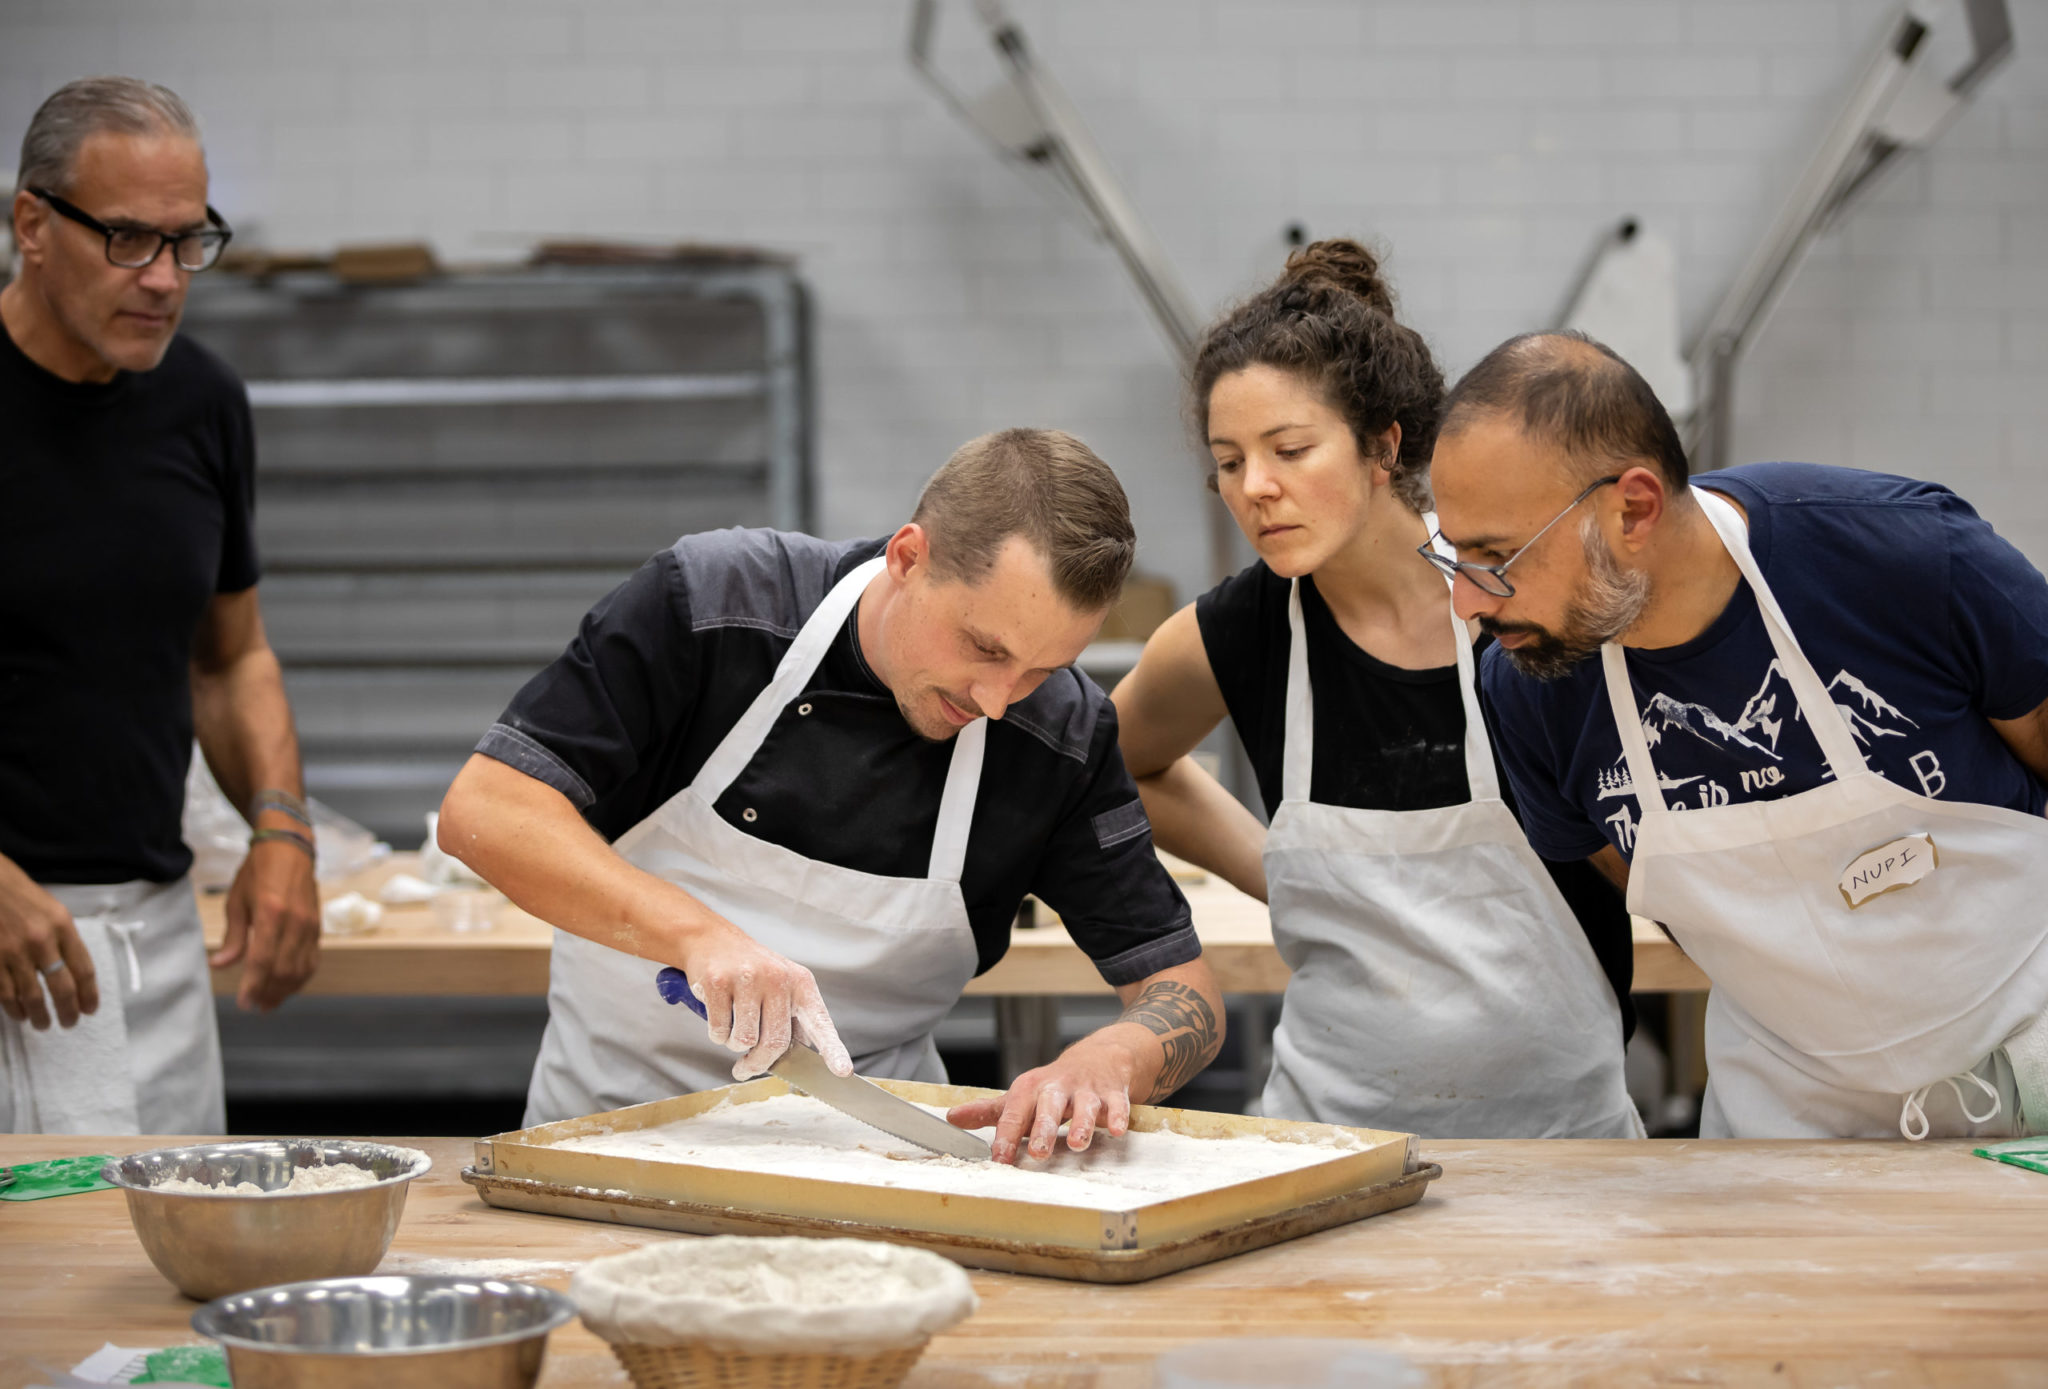 Students Louis Brouillet, left, and Celia Schwenter and Nirupam Singh, at right, watch intensely as chef Pablo Puluke Giet checks his ciabatta dough. (Chris Hardy/For Sonoma Magazine)